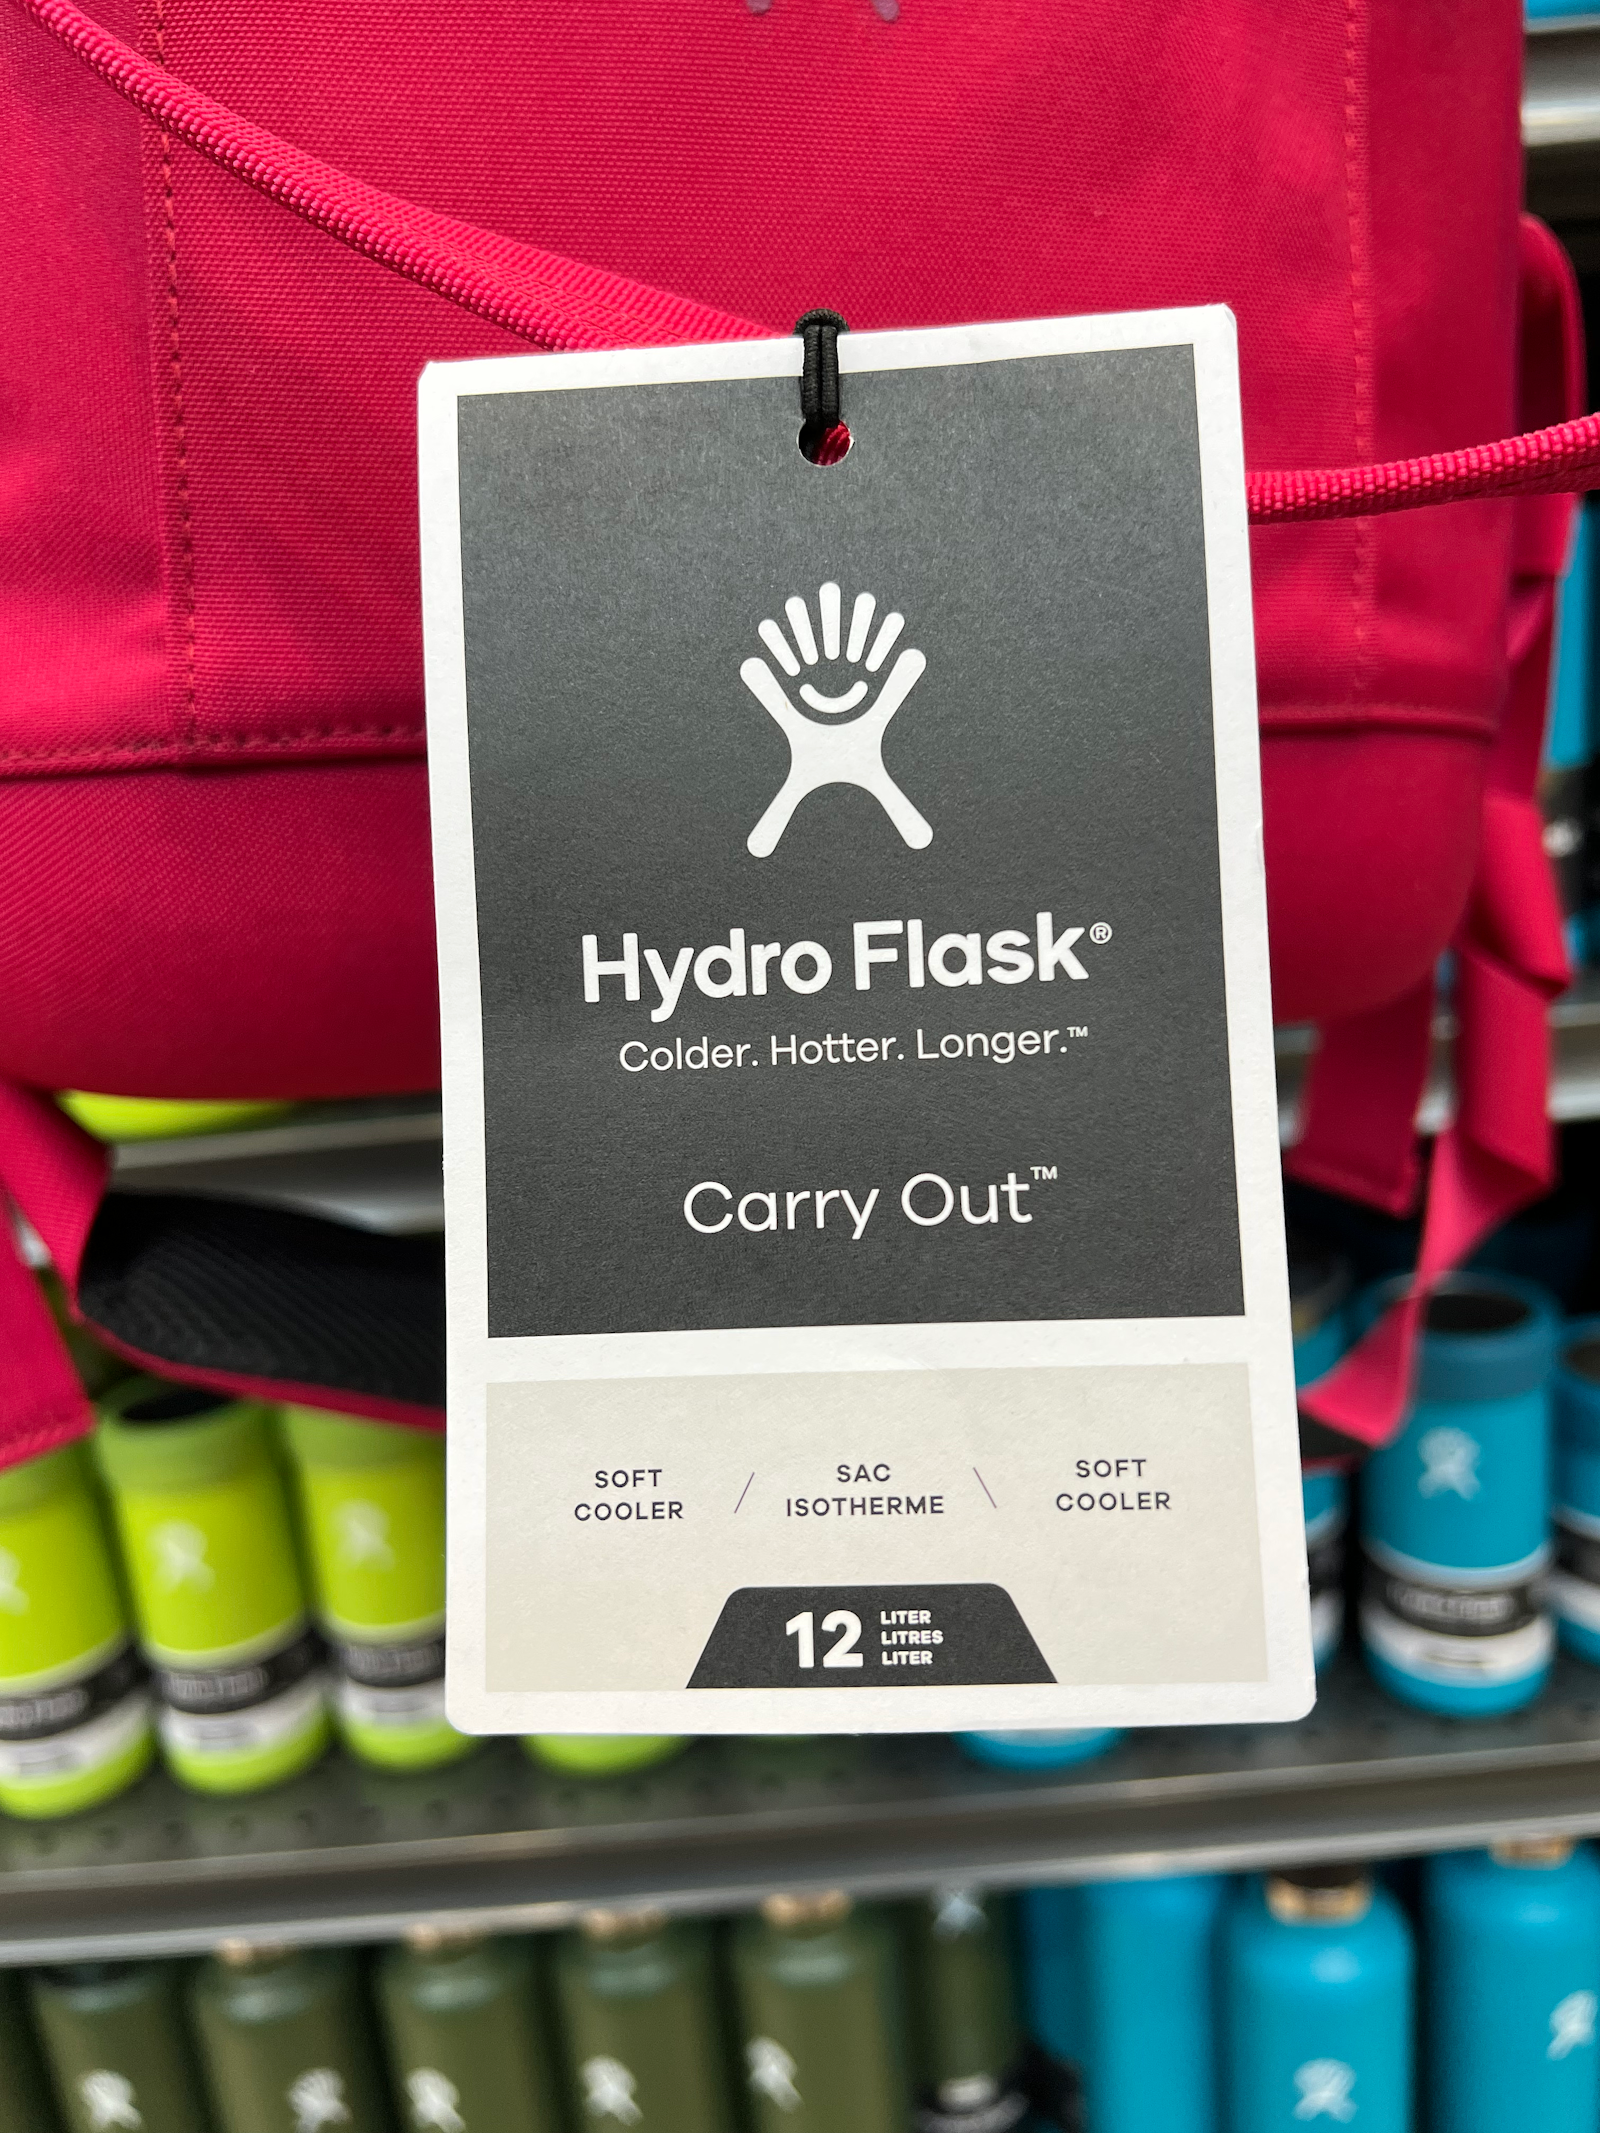 The Hydro Flask brand design hang tag on product in retail display.